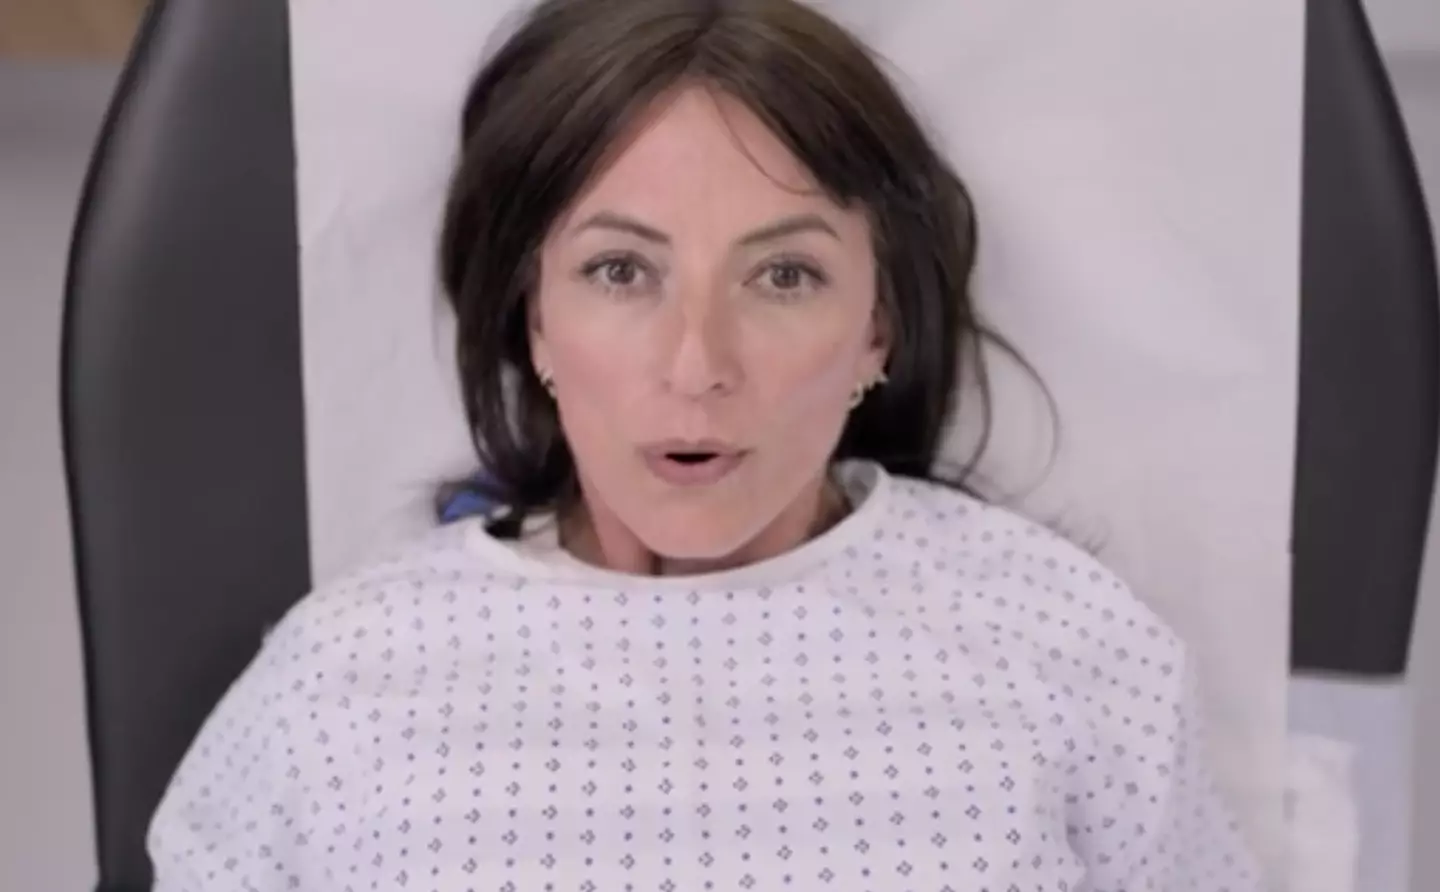 Davina McCall is being praised for 'demystifying' the procedure.